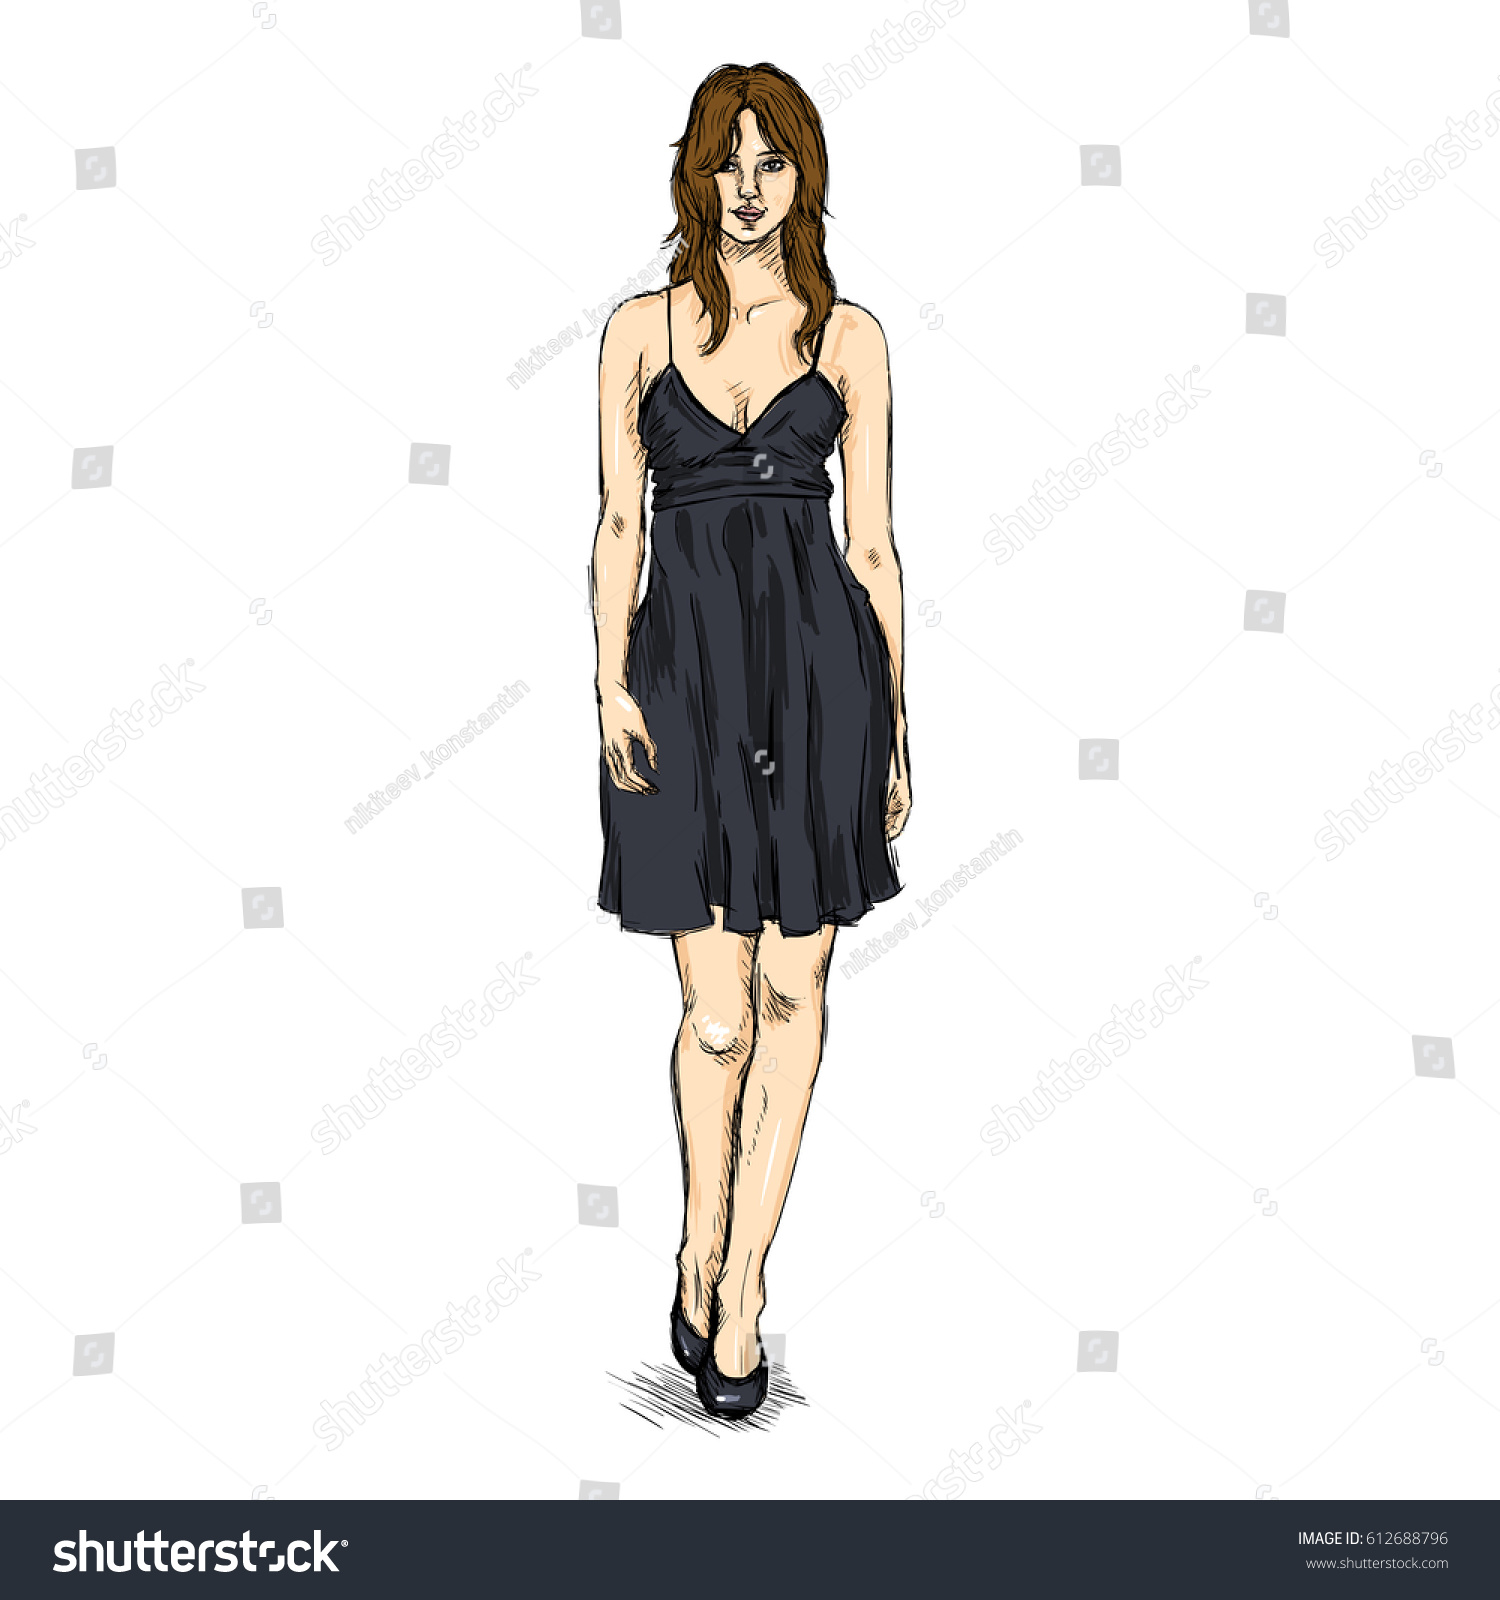 Vector Sketch Fashion Female Model Short Stock Vector Royalty Free 612688796 See more ideas about dress sketches, fashion sketches, fashion illustration. https www shutterstock com image vector vector sketch fashion female model short 612688796